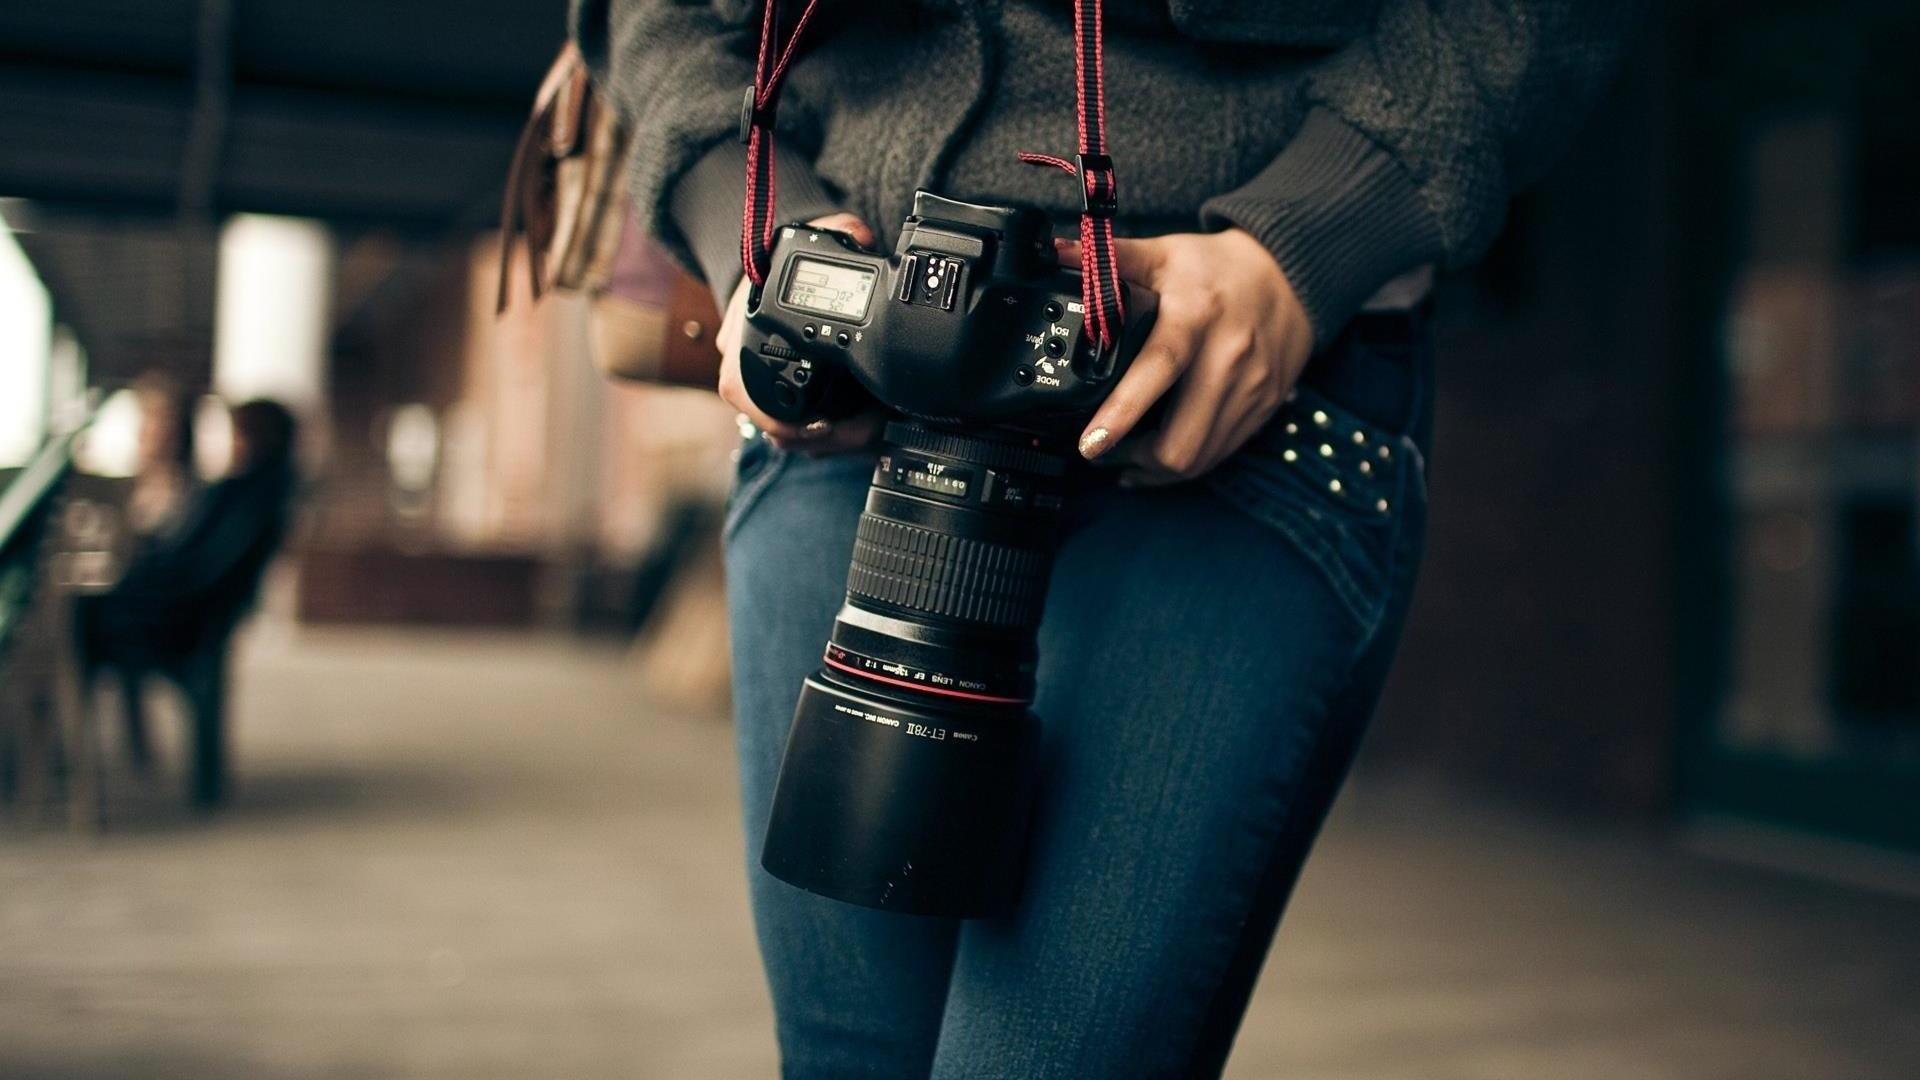 Girl and camera. HD wallpaper for Android